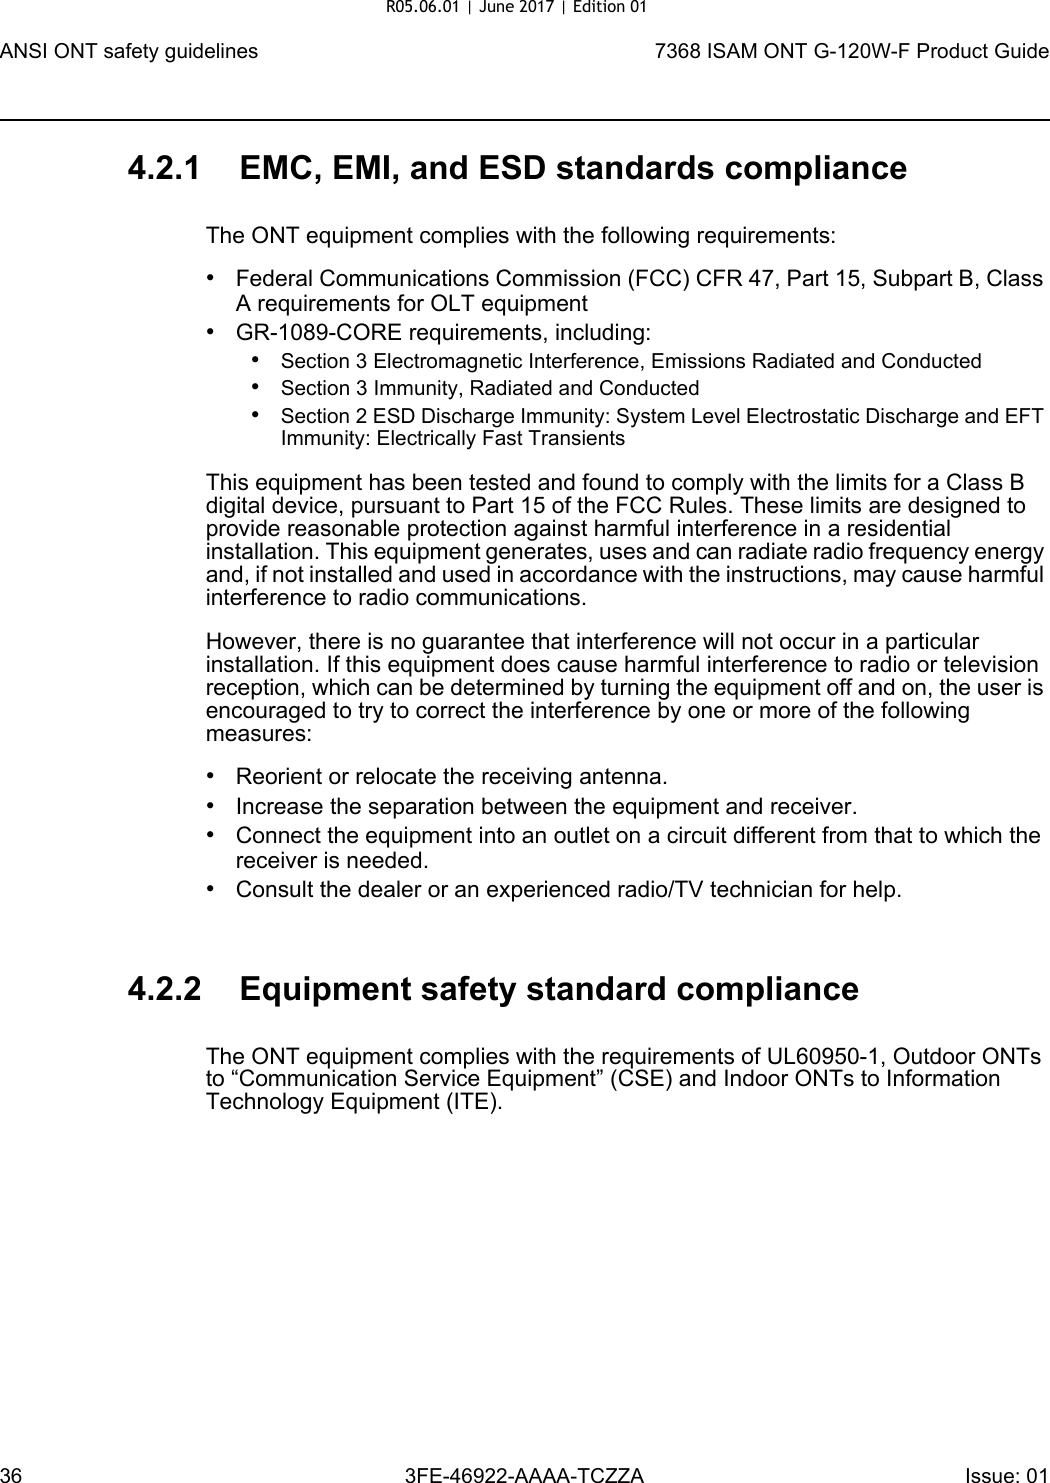 ANSI ONT safety guidelines367368 ISAM ONT G-120W-F Product Guide3FE-46922-AAAA-TCZZA Issue: 01 4.2.1 EMC, EMI, and ESD standards complianceThe ONT equipment complies with the following requirements:•Federal Communications Commission (FCC) CFR 47, Part 15, Subpart B, Class A requirements for OLT equipment•GR-1089-CORE requirements, including:•Section 3 Electromagnetic Interference, Emissions Radiated and Conducted•Section 3 Immunity, Radiated and Conducted•Section 2 ESD Discharge Immunity: System Level Electrostatic Discharge and EFT Immunity: Electrically Fast TransientsThis equipment has been tested and found to comply with the limits for a Class B digital device, pursuant to Part 15 of the FCC Rules. These limits are designed to provide reasonable protection against harmful interference in a residential installation. This equipment generates, uses and can radiate radio frequency energy and, if not installed and used in accordance with the instructions, may cause harmful interference to radio communications.However, there is no guarantee that interference will not occur in a particular installation. If this equipment does cause harmful interference to radio or television reception, which can be determined by turning the equipment off and on, the user is encouraged to try to correct the interference by one or more of the following measures:•Reorient or relocate the receiving antenna.•Increase the separation between the equipment and receiver.•Connect the equipment into an outlet on a circuit different from that to which the receiver is needed.•Consult the dealer or an experienced radio/TV technician for help.4.2.2 Equipment safety standard complianceThe ONT equipment complies with the requirements of UL60950-1, Outdoor ONTs to “Communication Service Equipment” (CSE) and Indoor ONTs to Information Technology Equipment (ITE).R05.06.01 | June 2017 | Edition 01 